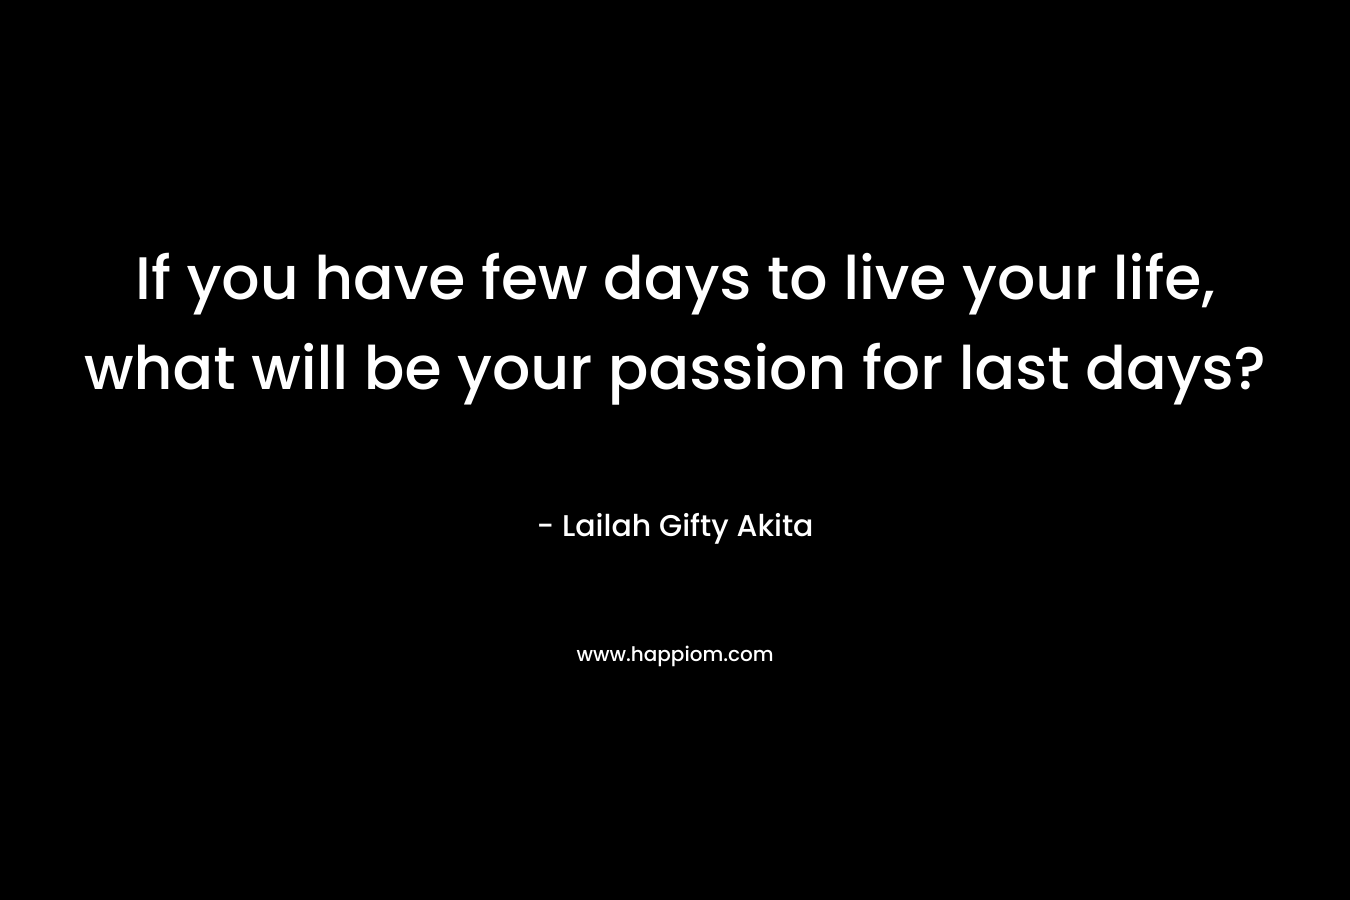 If you have few days to live your life, what will be your passion for last days?